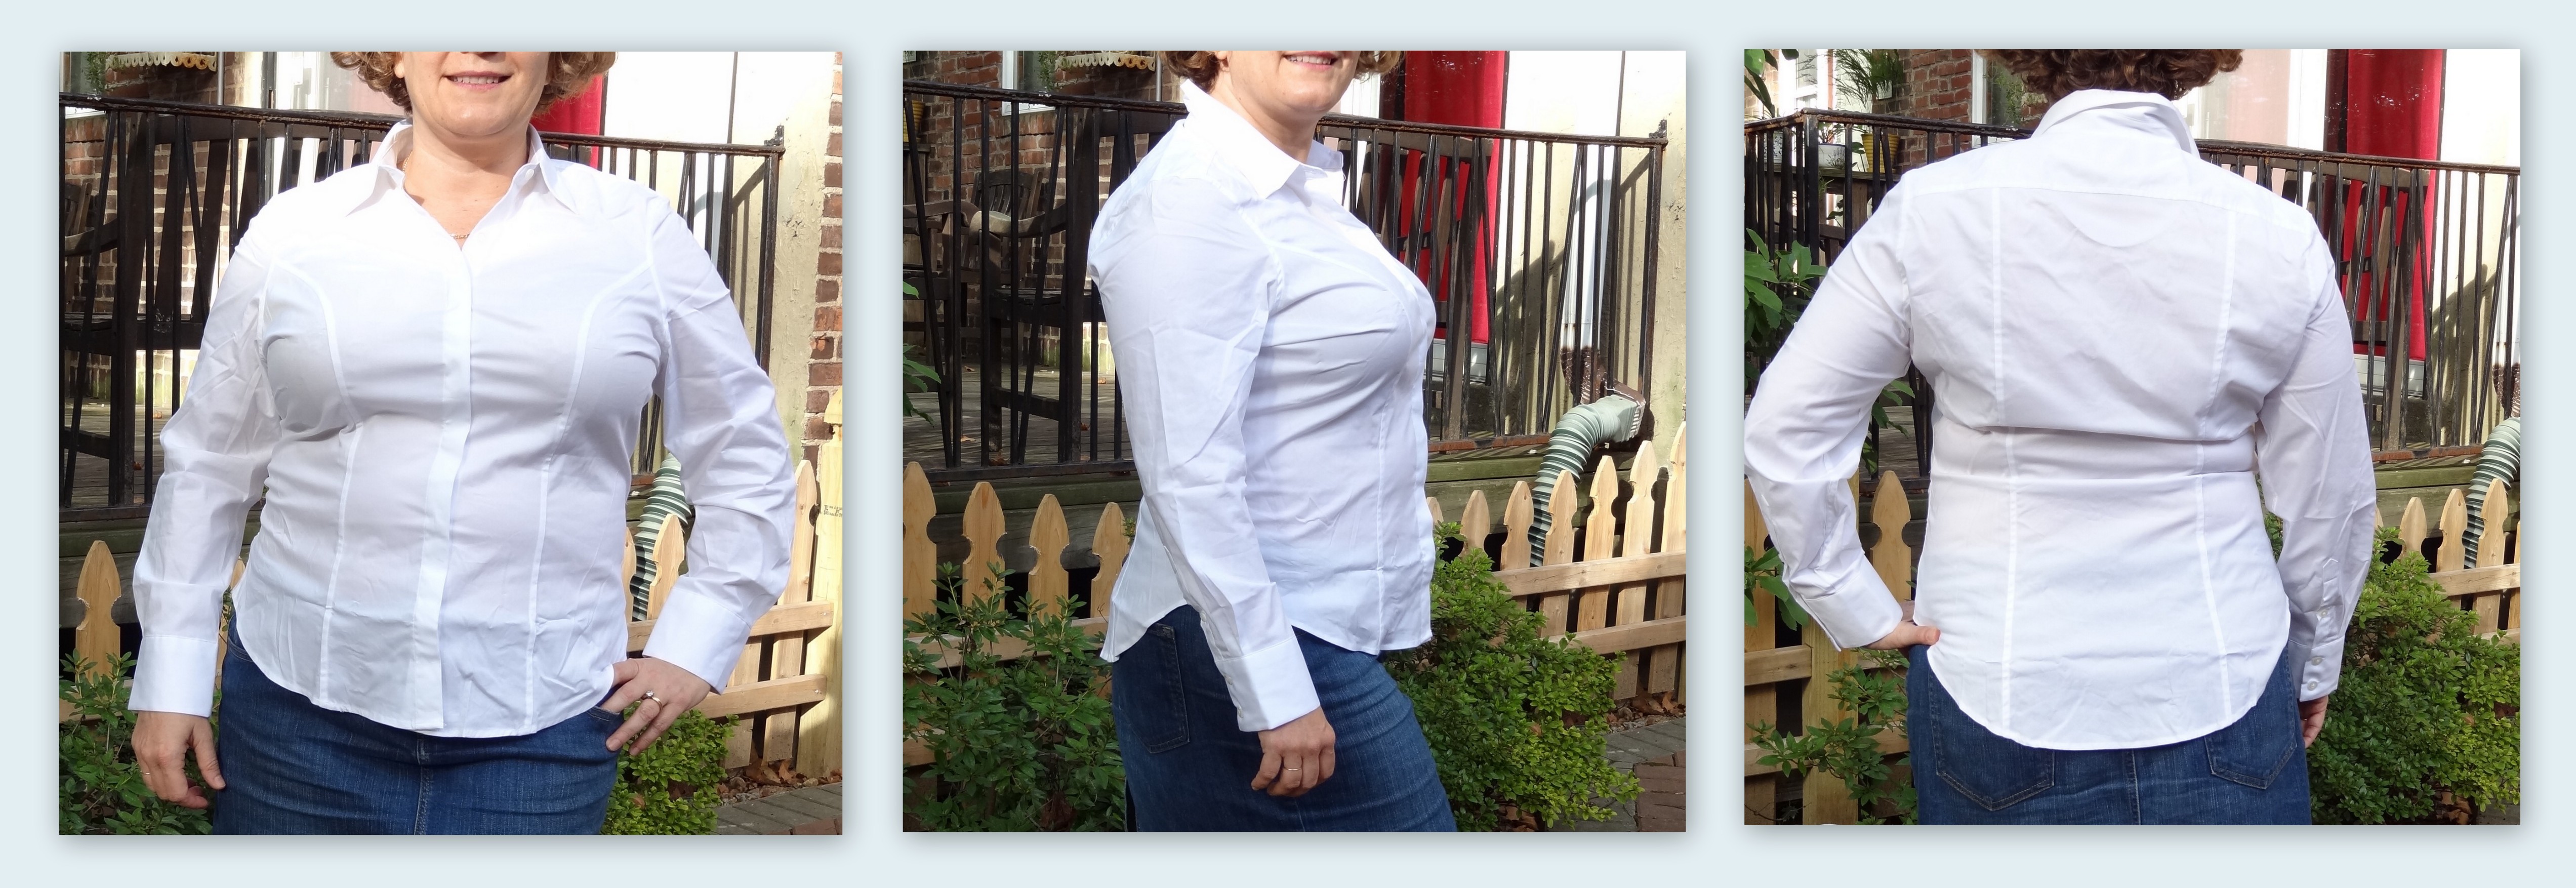 Big-Bust-Fitting White Shirts: An Affordable Option from InStyle